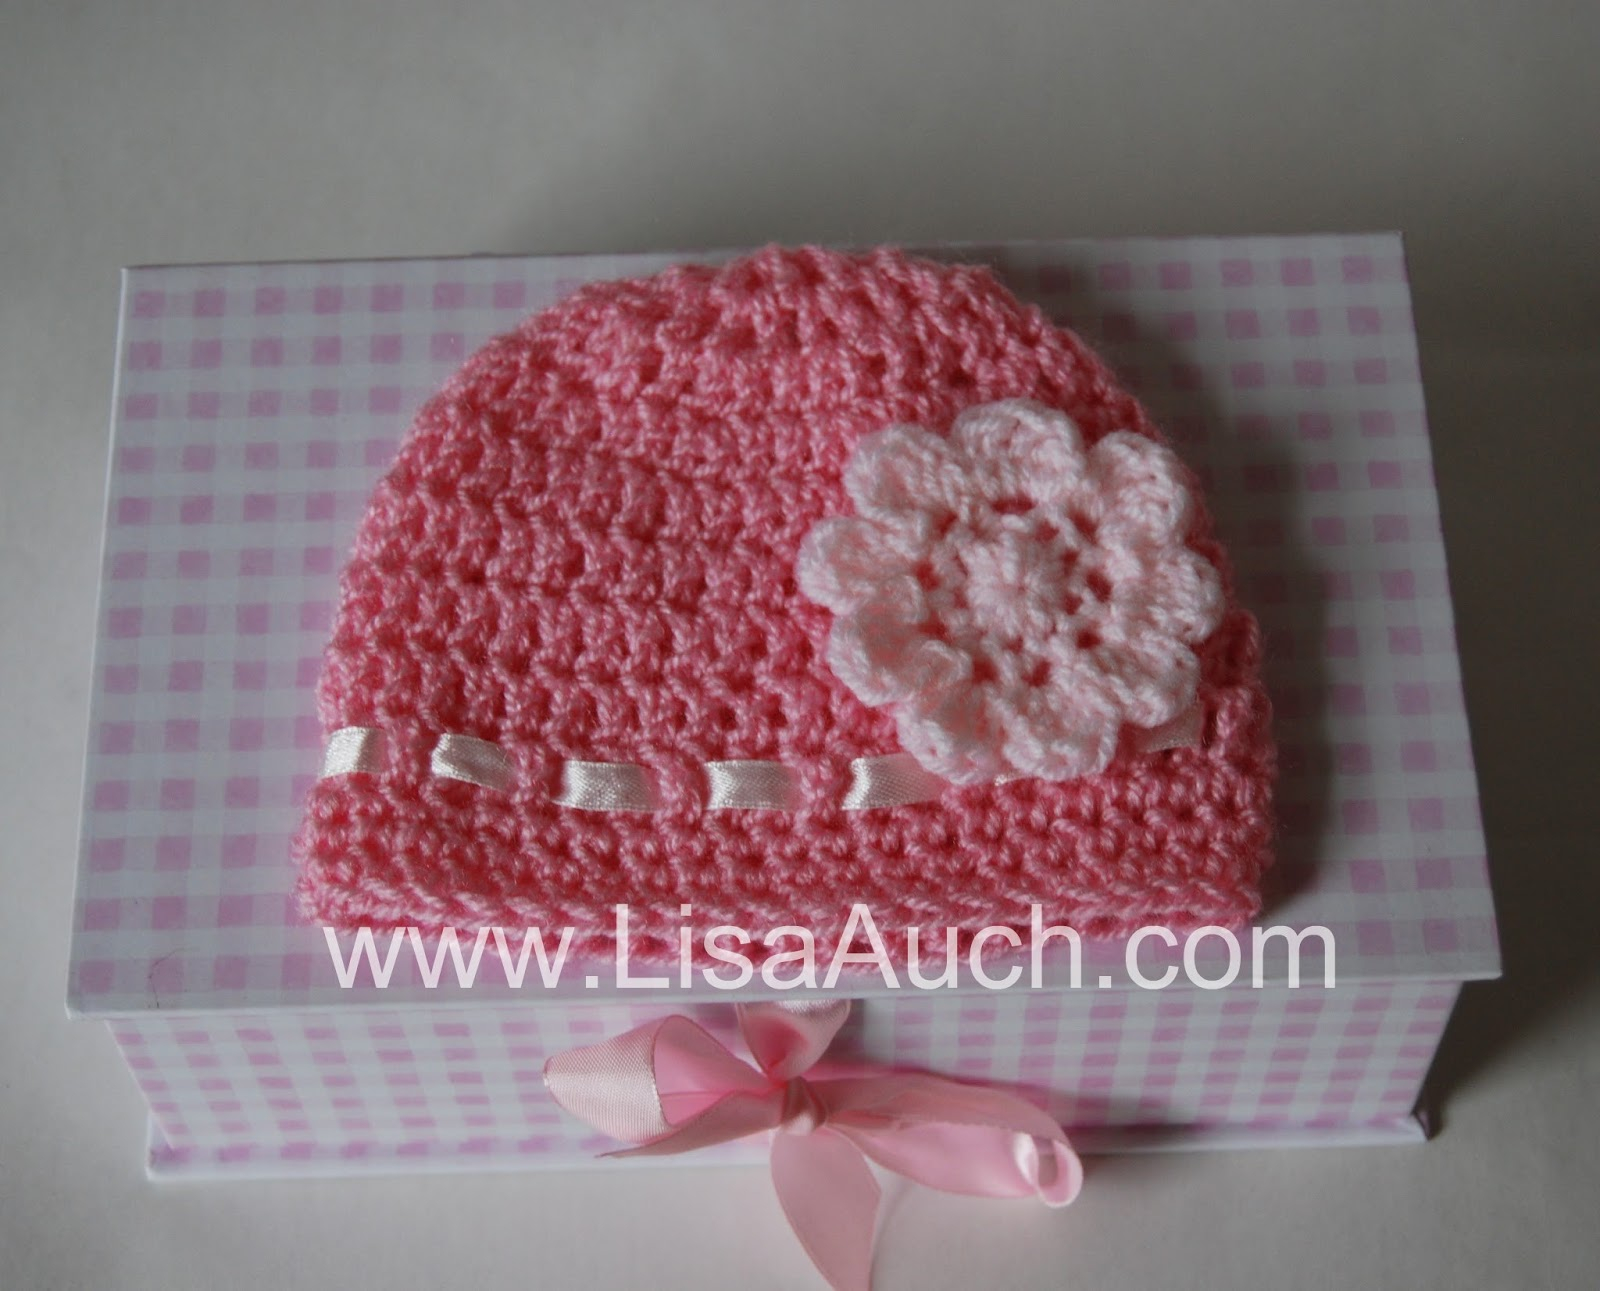 Free Crochet Baby Hats Patterns Easy Free Crochet Patterns And Designs Lisaauch Free Easy Crochet